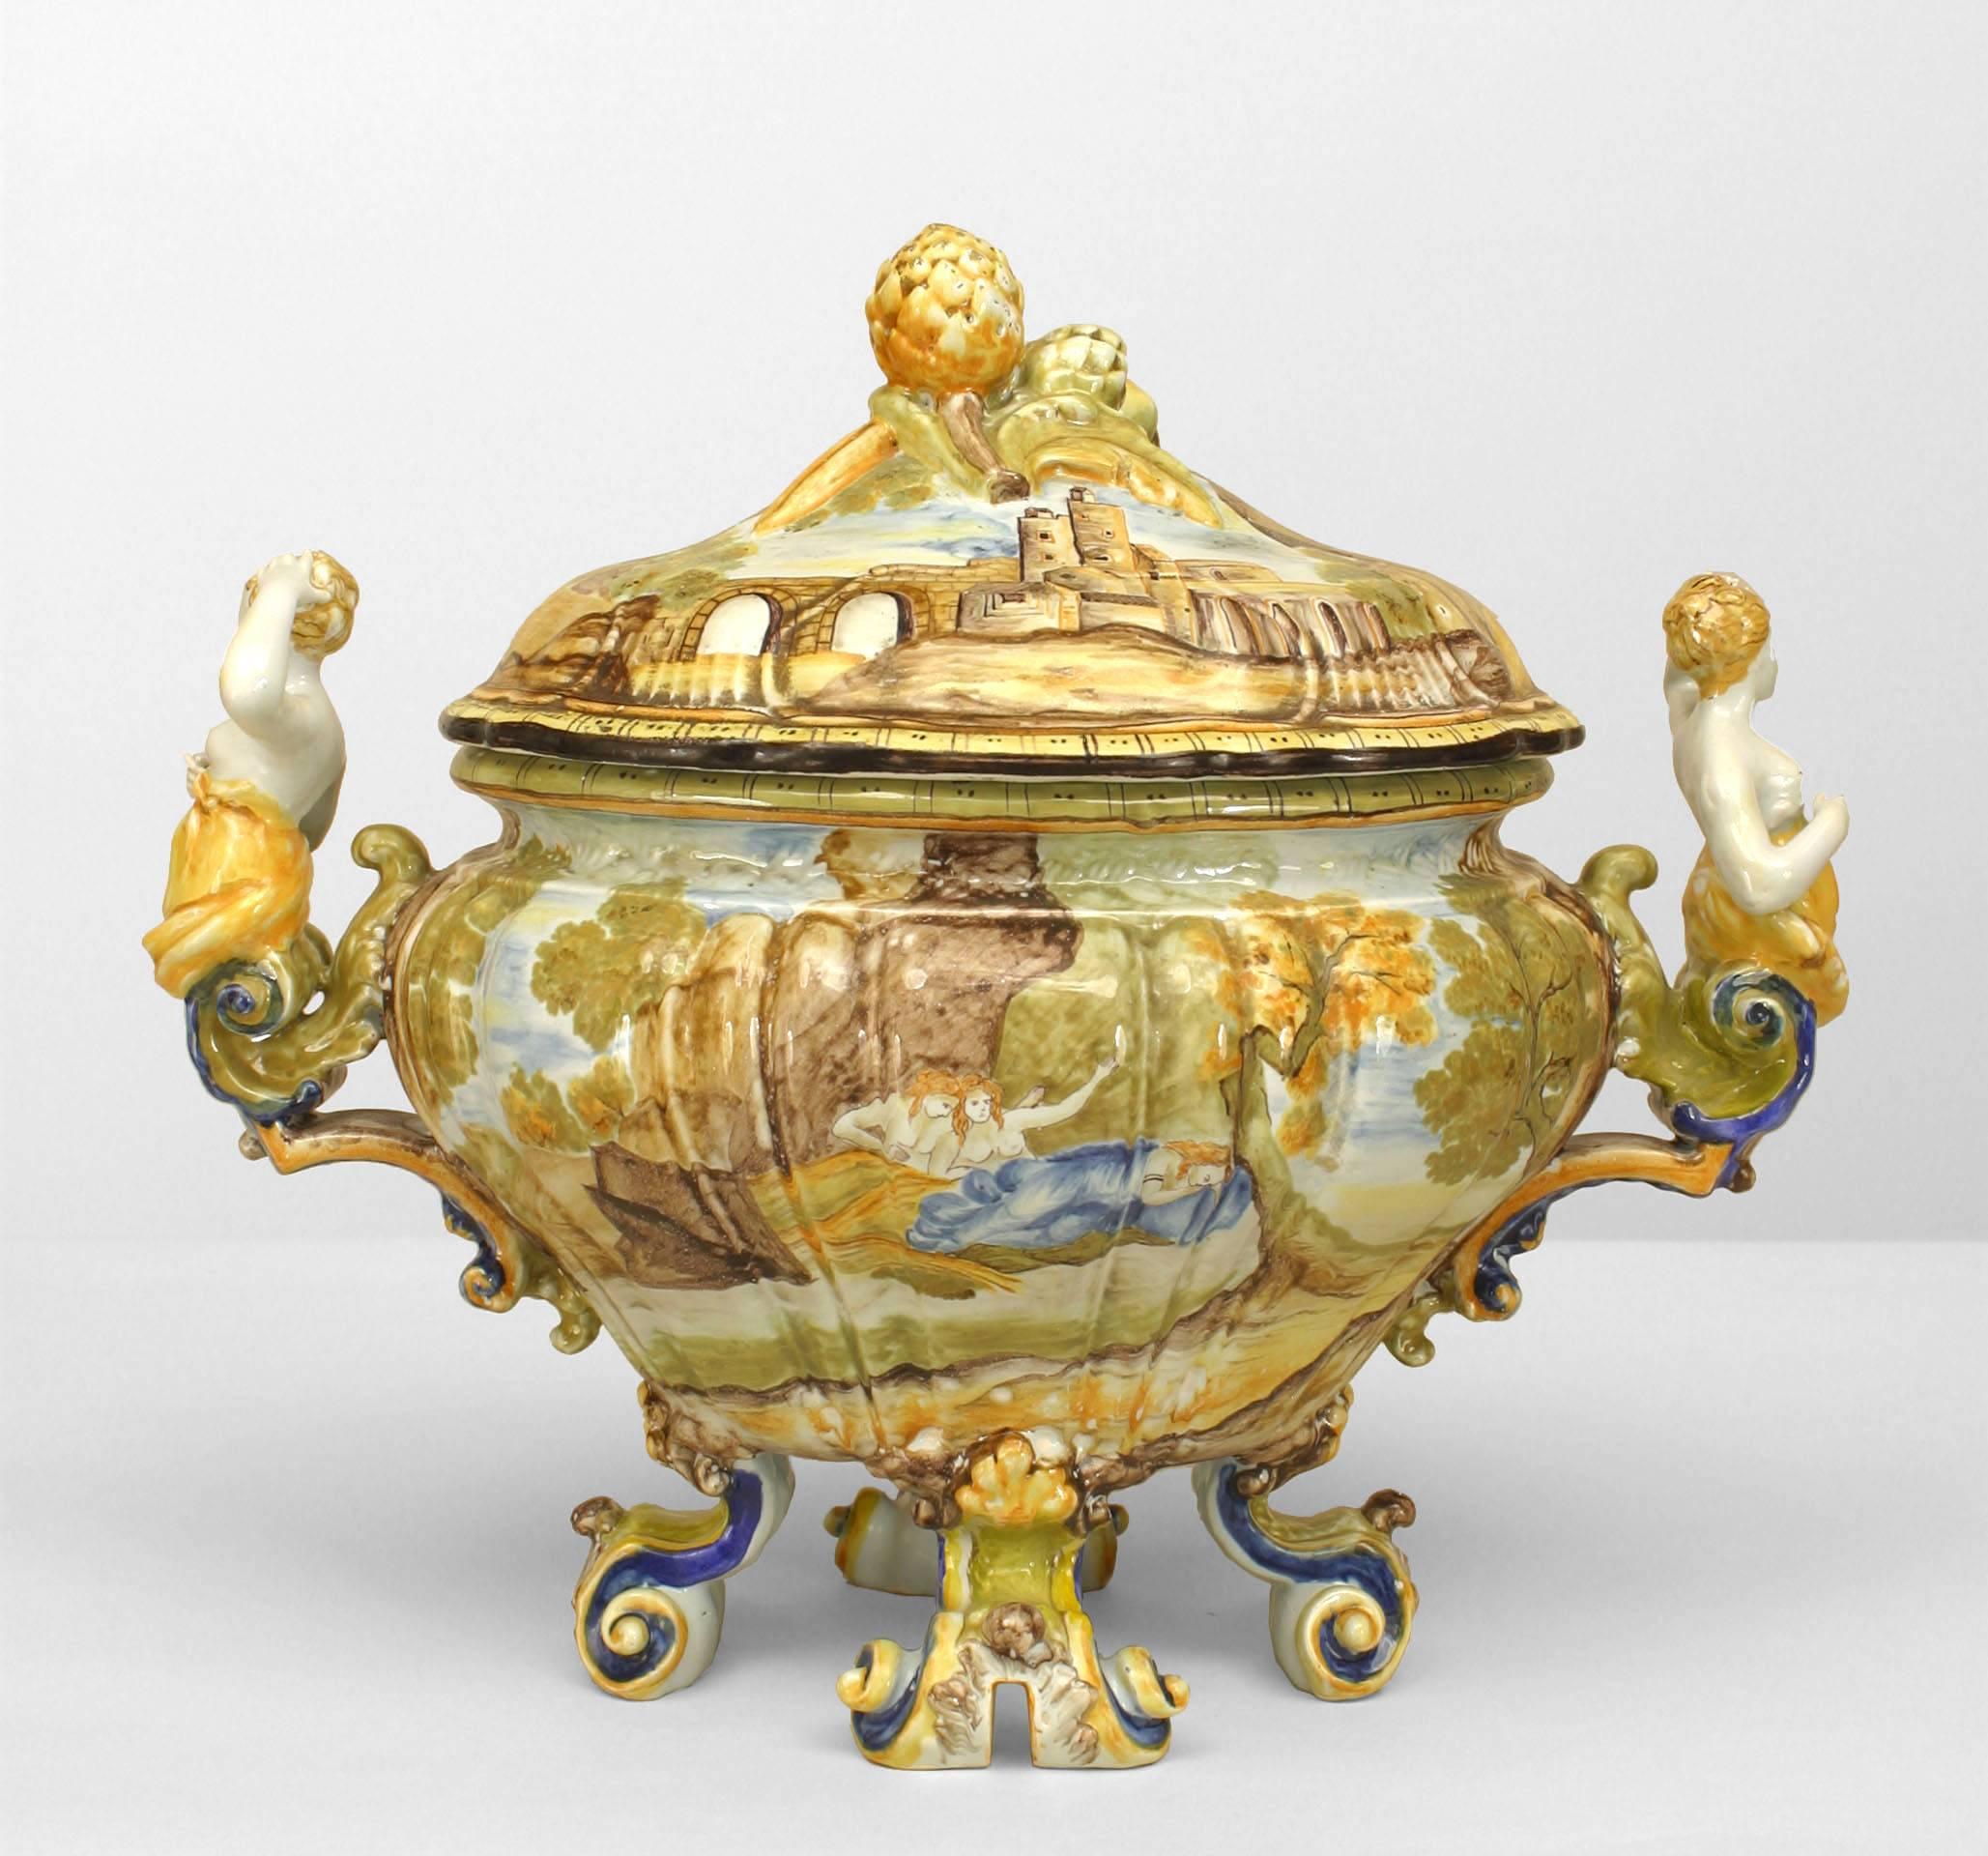 Italian (19th Century) Majolica porcelain tureen decorated with a landscape of figures and castle with female figural handles and supported on 4 scroll feet with a fruit finial top.
